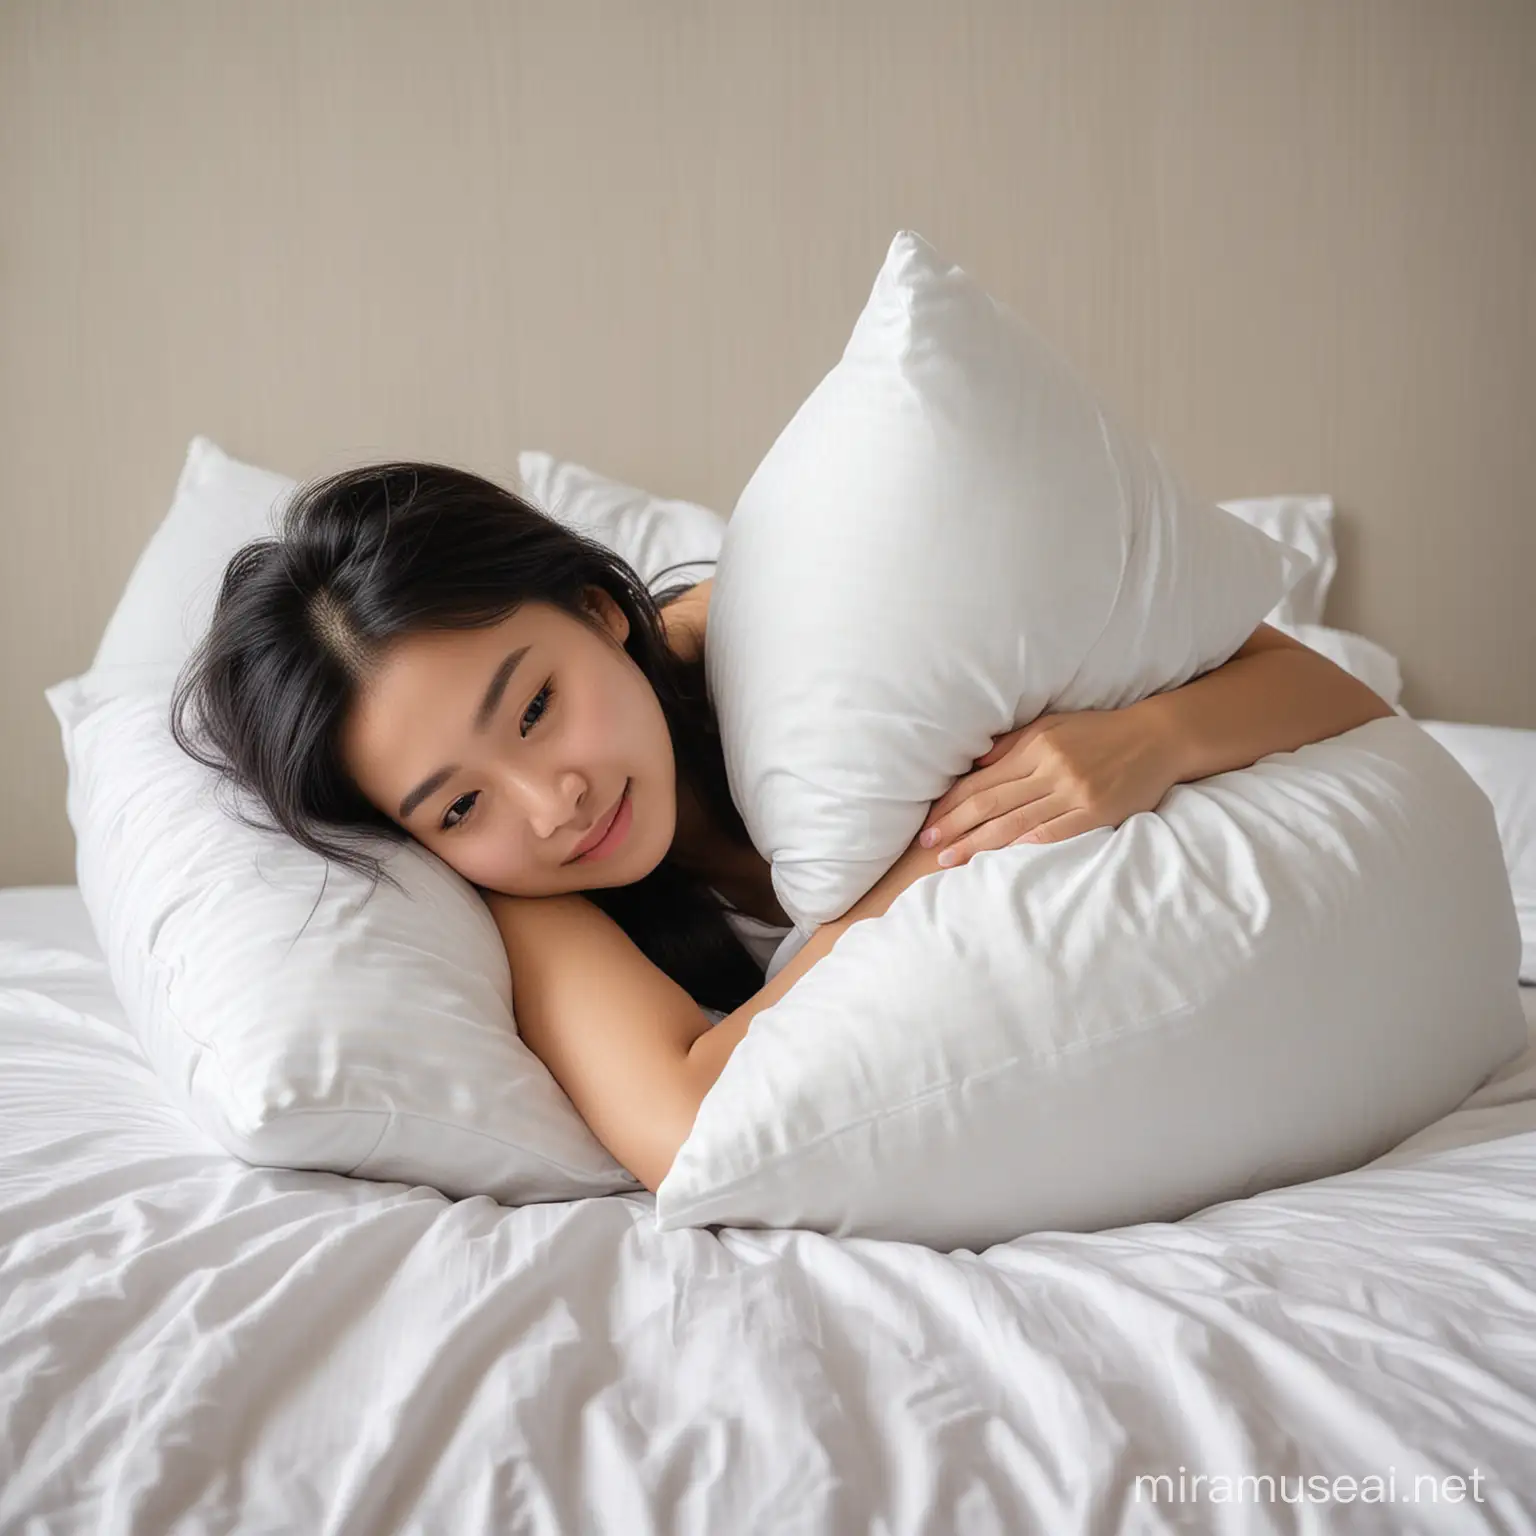 asian girl hug a pillow in bed